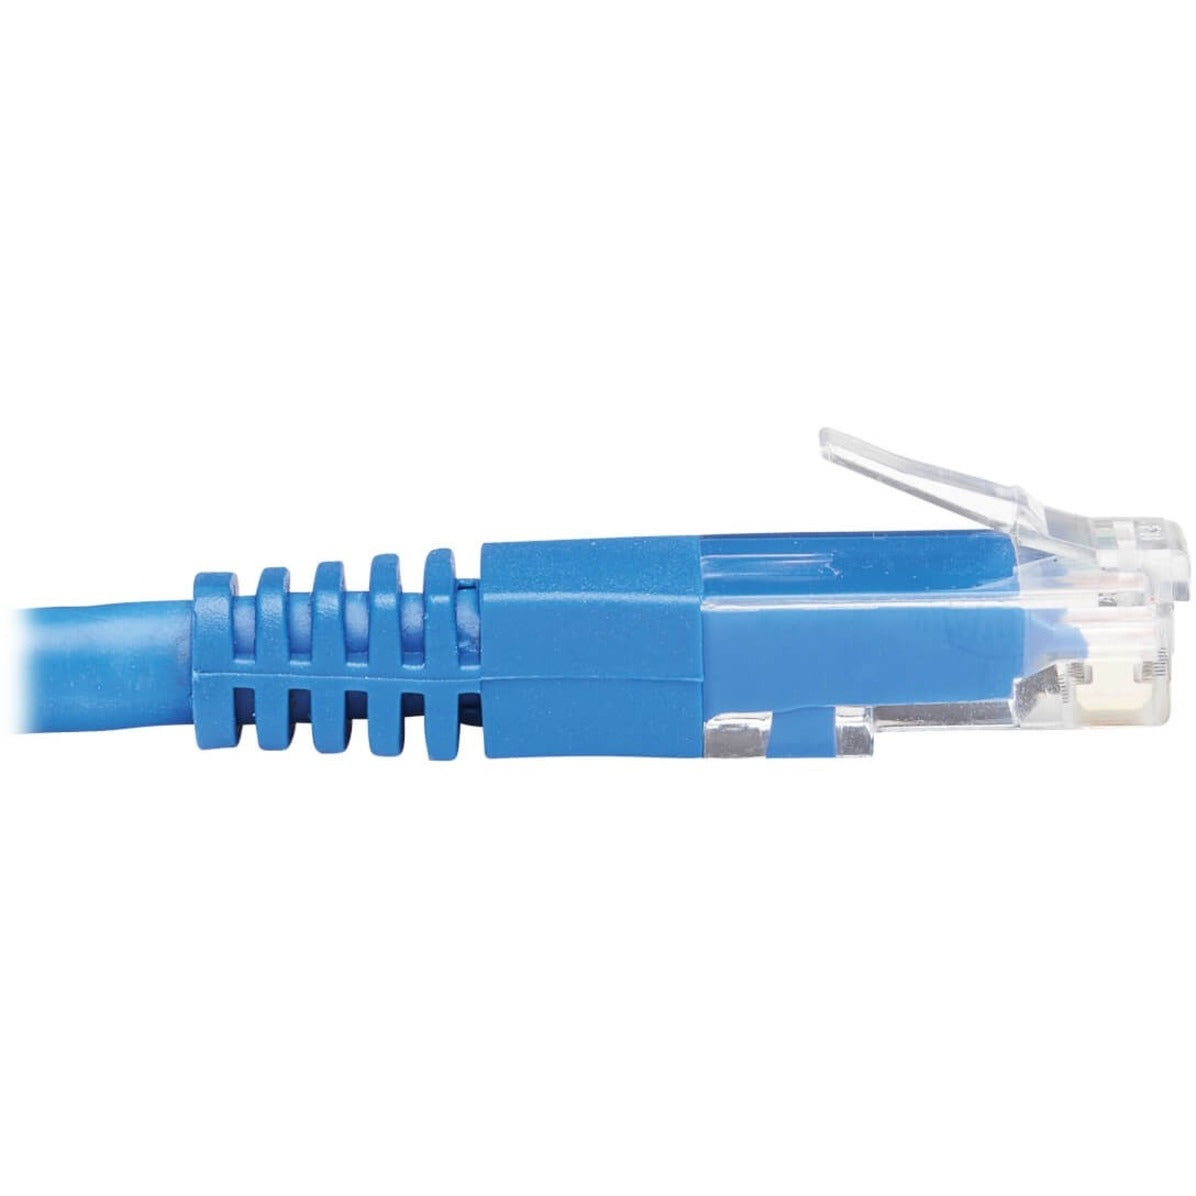 Tripp Lite N204-015-BL-RA Right-Angle Cat6 Ethernet Cable - 15 ft., M/M, Blue, Stranded, Molded, 90° Angled Connector, Gold Plated